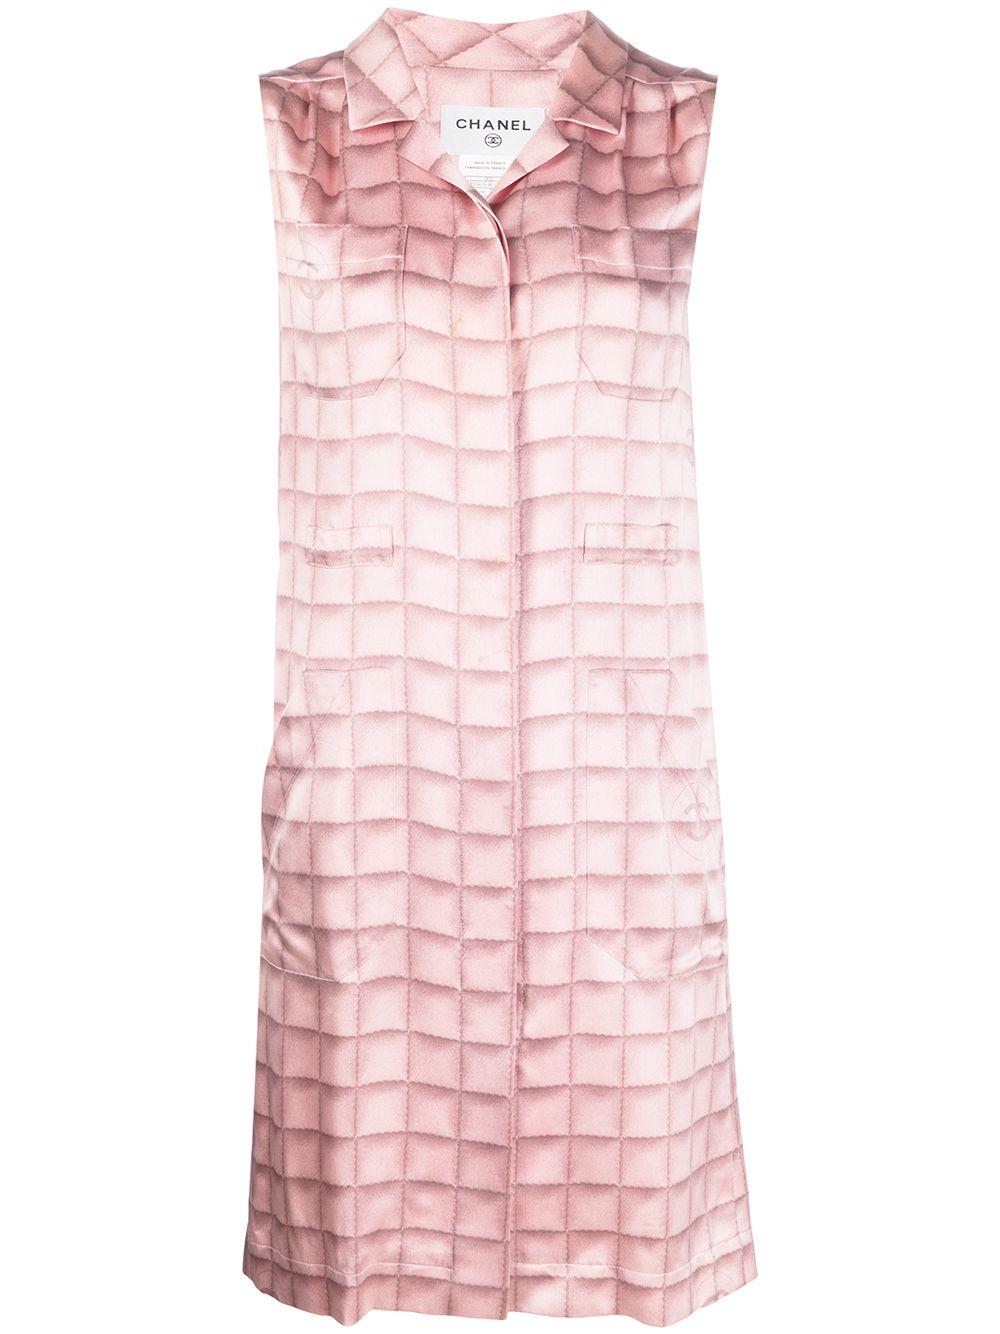 Expertly crafted in France from pure silk, this pre-owned, contemporary-style shirt dress by Chanel showcases a whimsical tie-dye effect check print pattern, a concealed front button fastening, notched lapels and long sleeves with button cuffs.